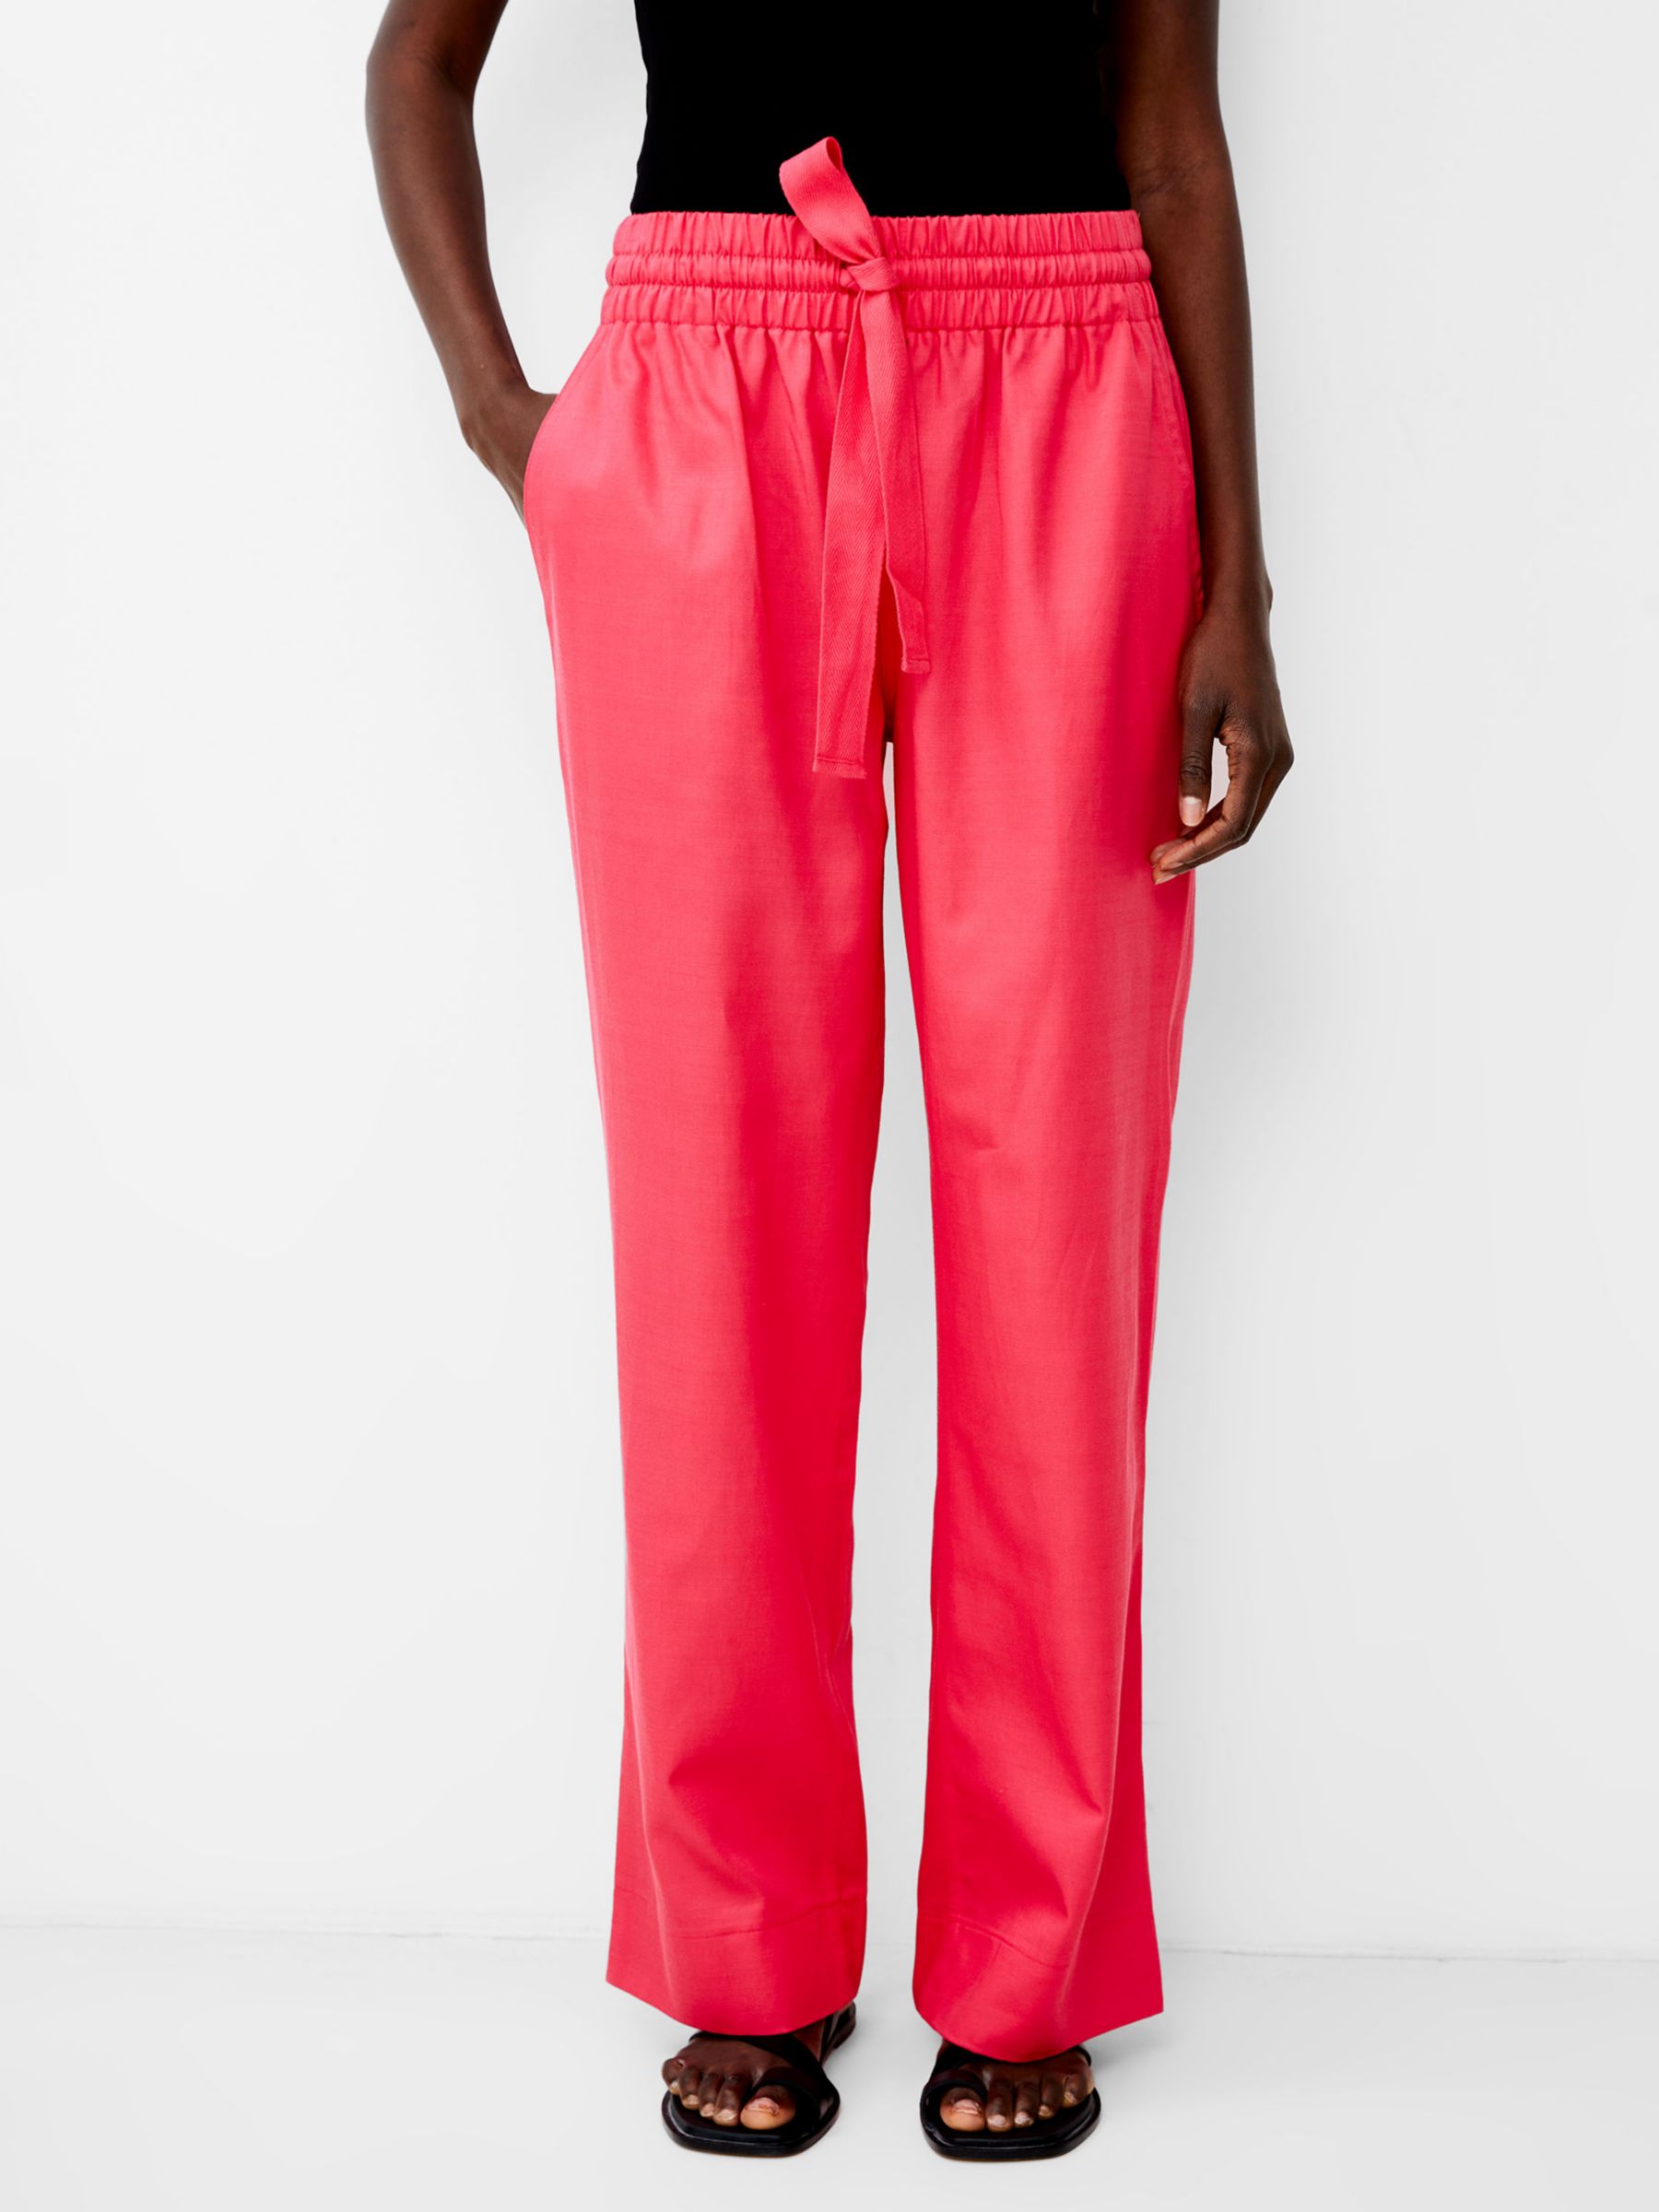 Buy French Connection Bodie Cotton Blend Trousers Online at johnlewis.com